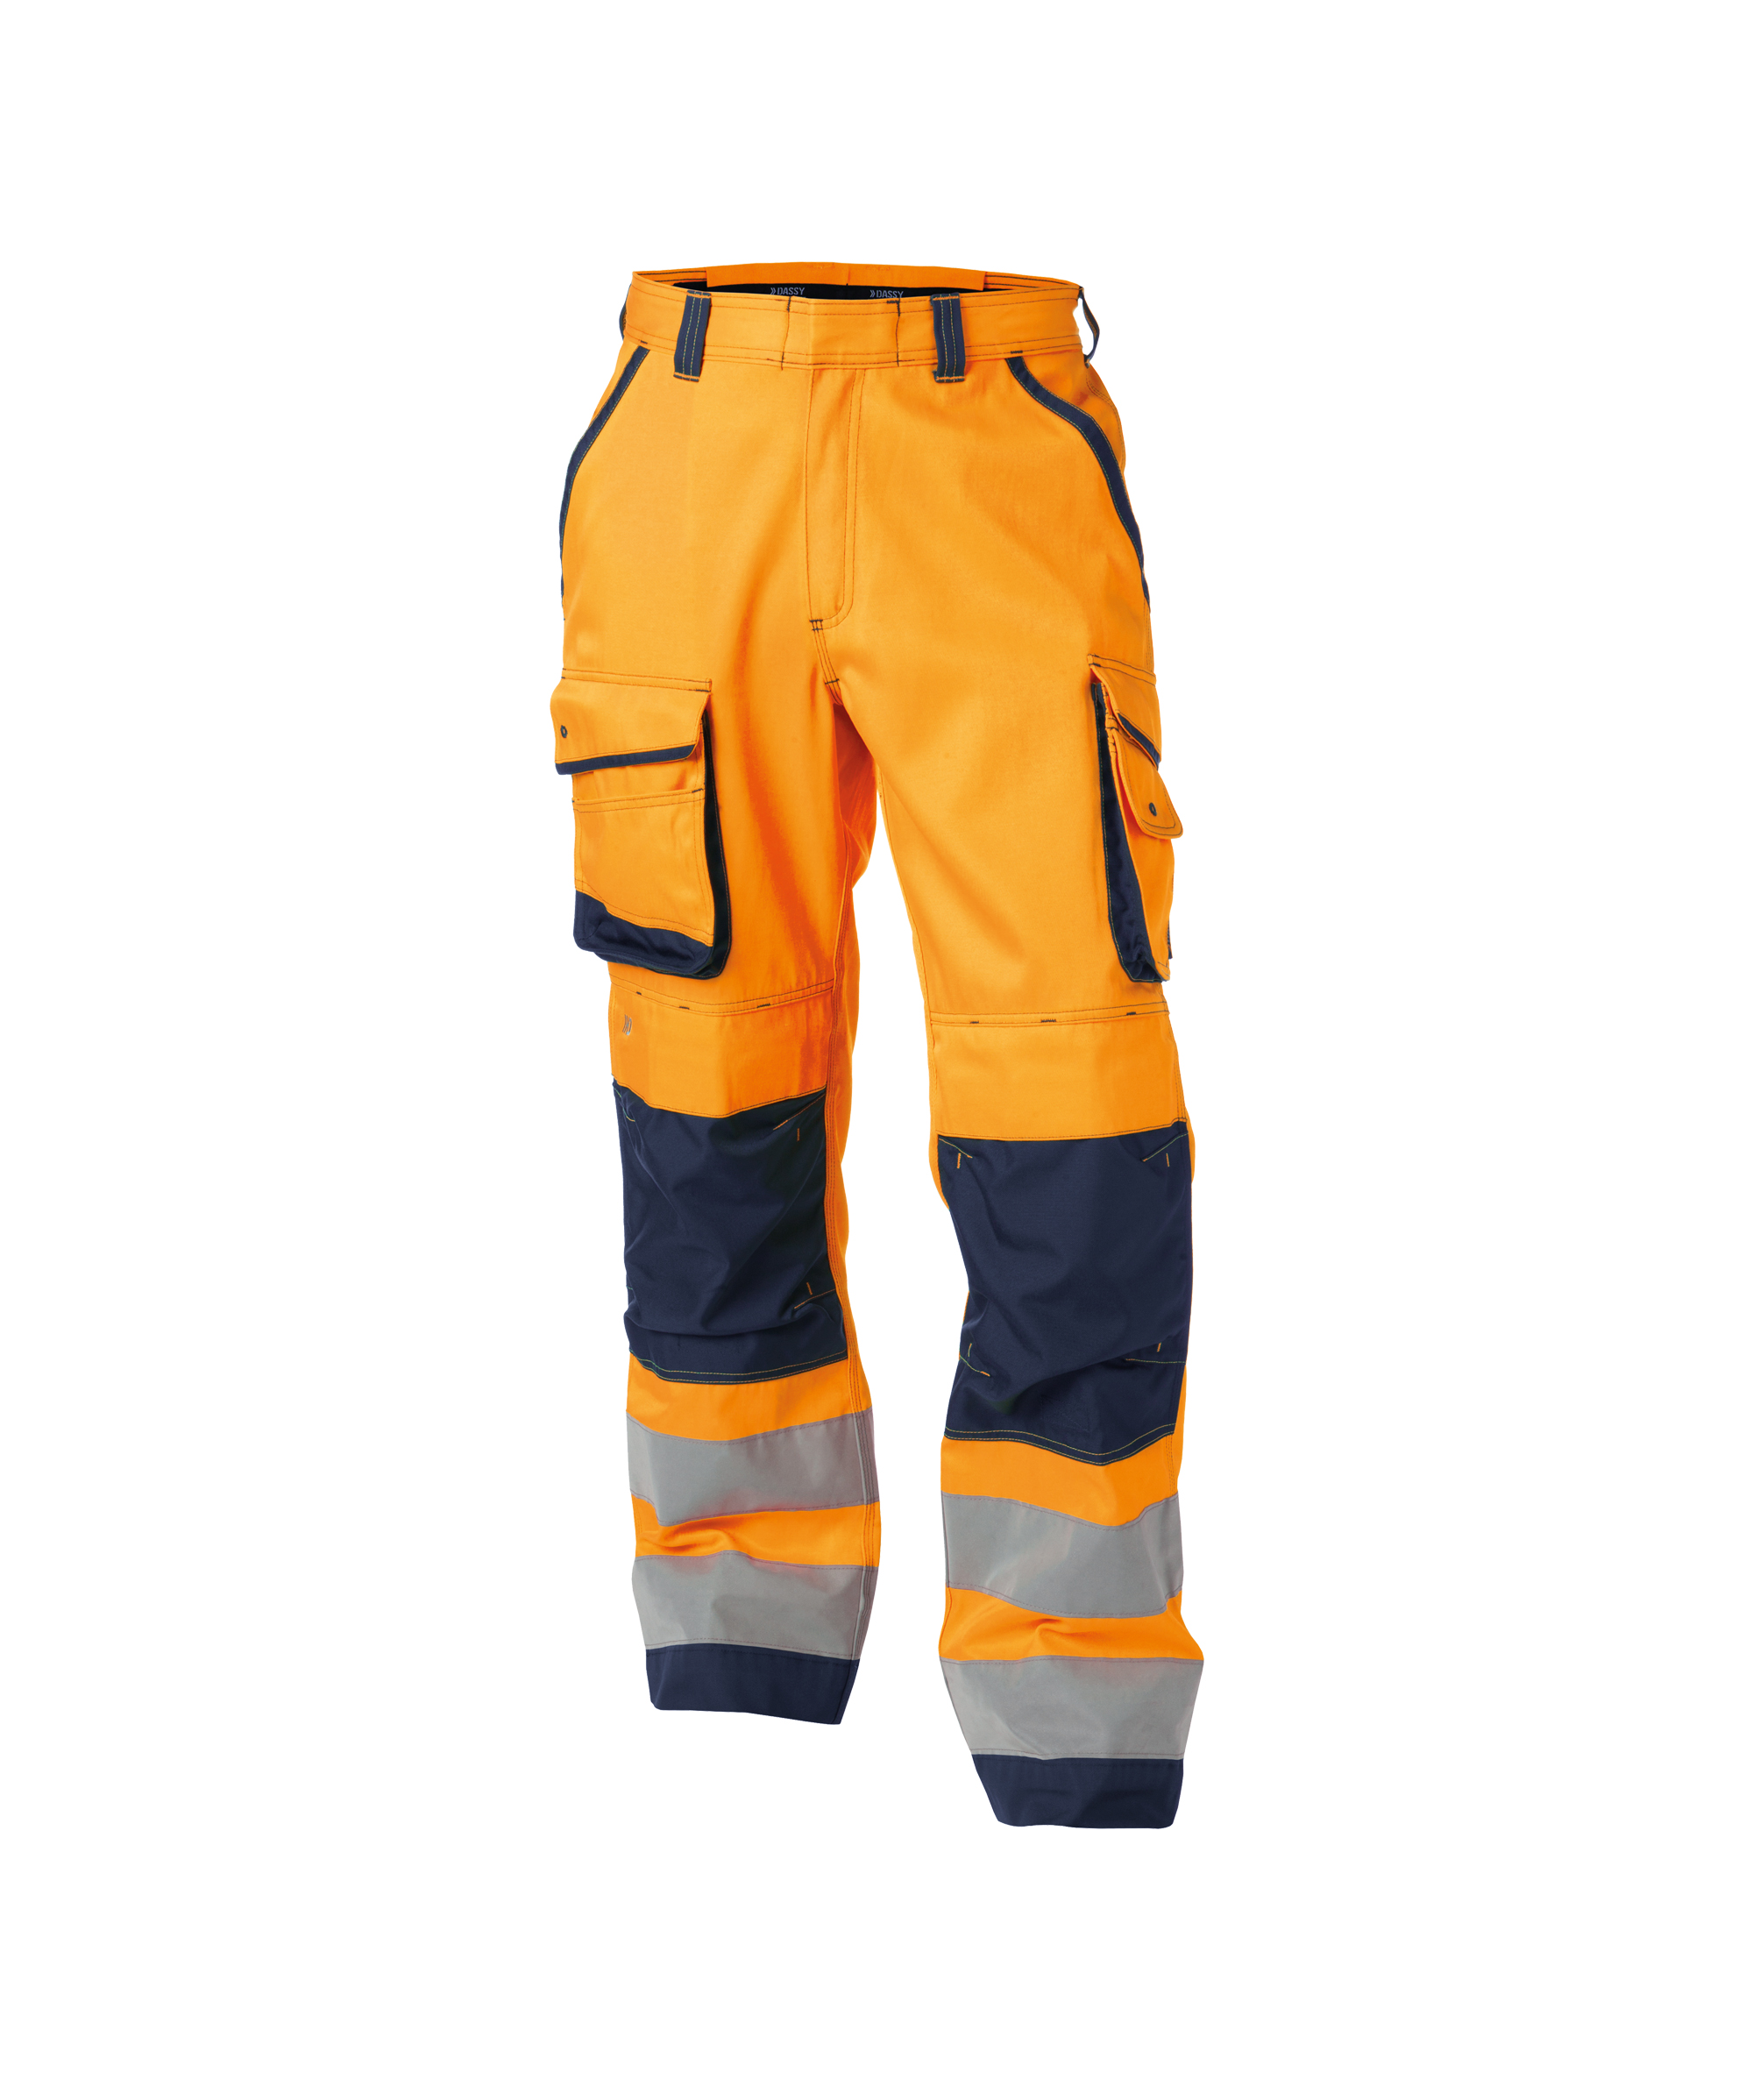 chicago_high-visibility-work-trousers-with-knee-pockets_fluo-orange-navy_front.jpg